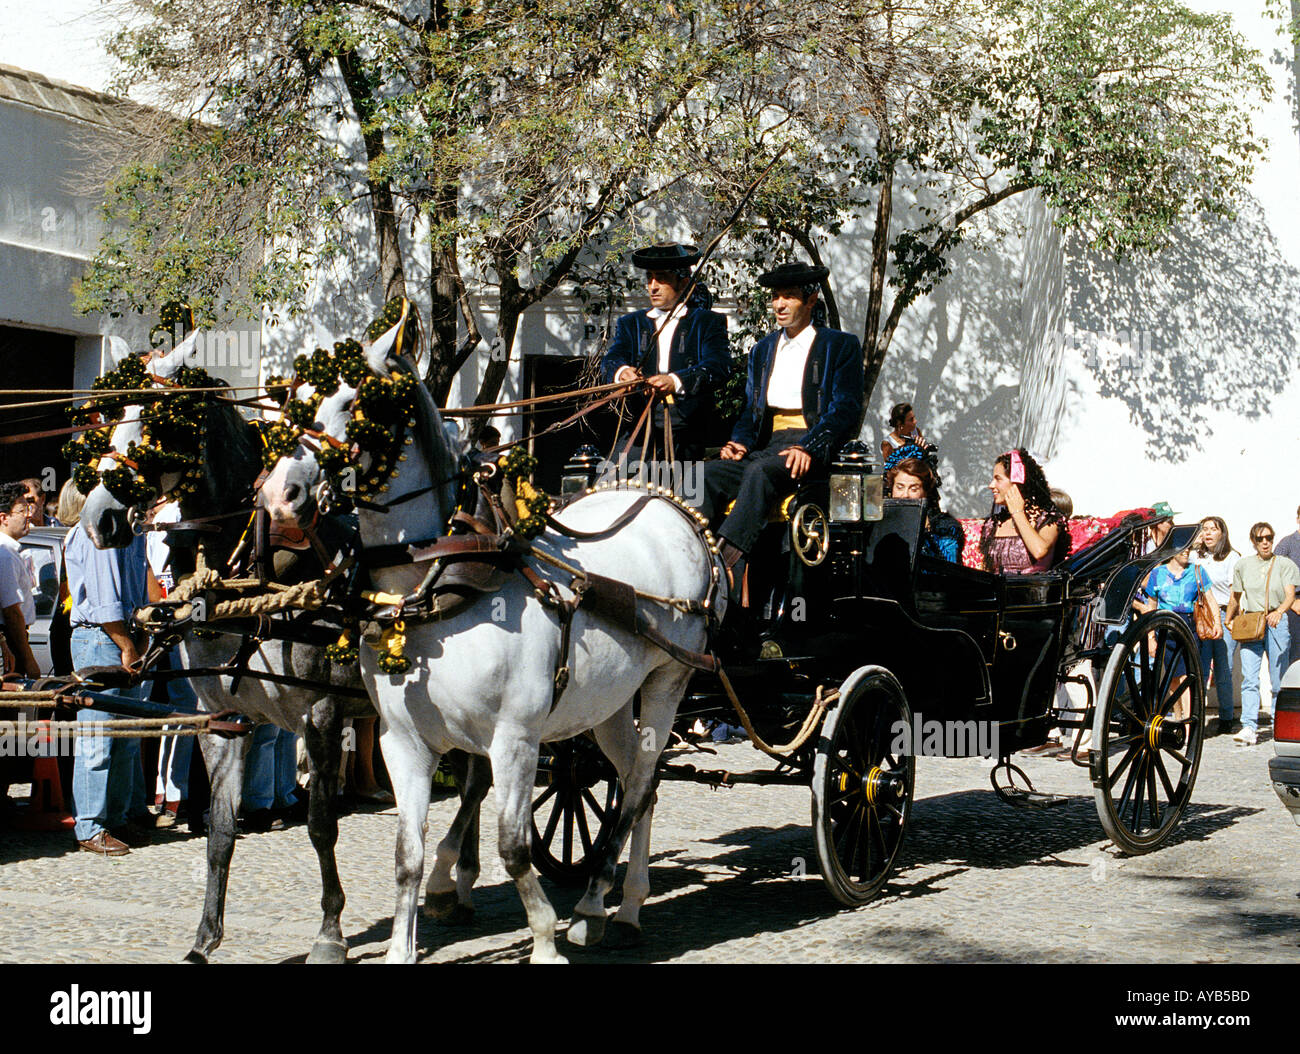 Couples arriving in horsedrawn carriages for a festival in Rhonda Andalucia Spain Stock Photo